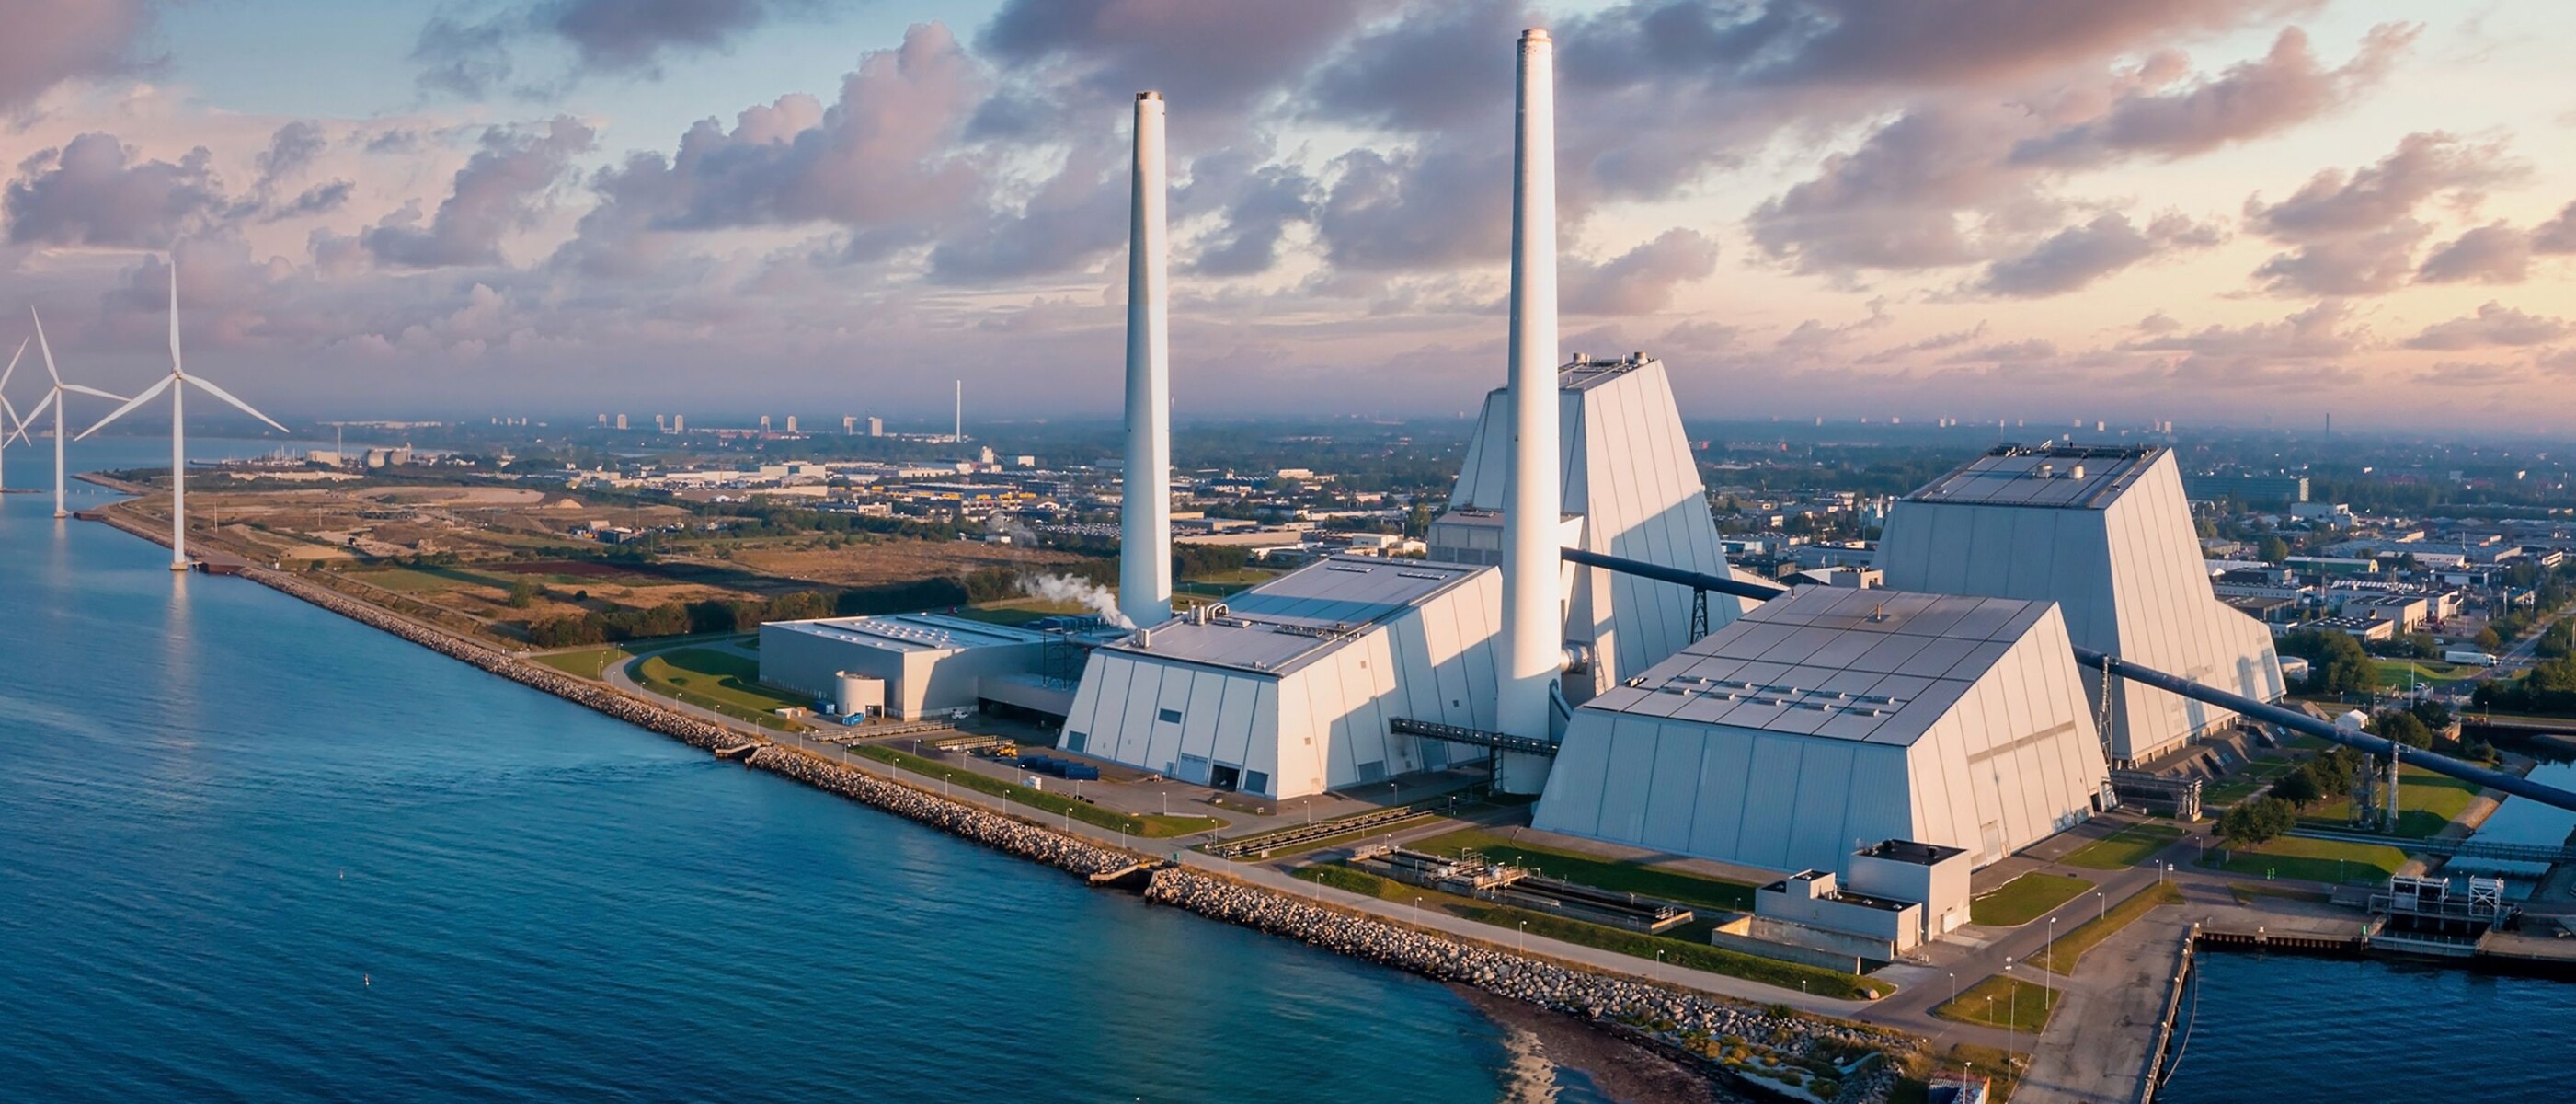 Fossil-fuelled power plant